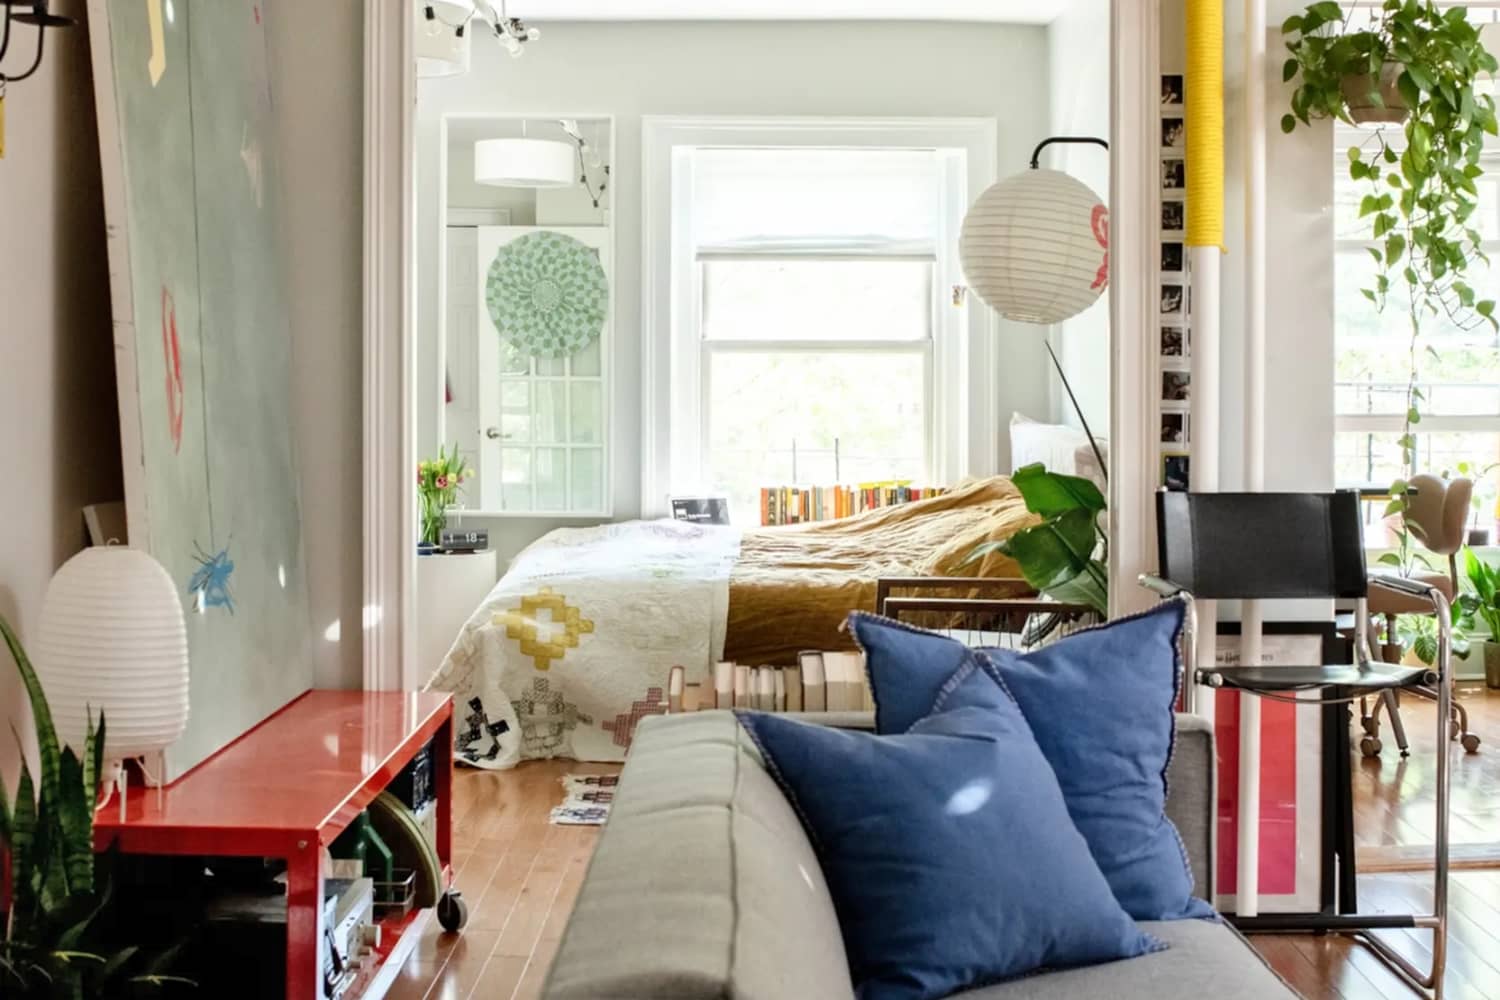 See Inside a Cozy Brooklyn Apartment That Rents for $3600 a Month